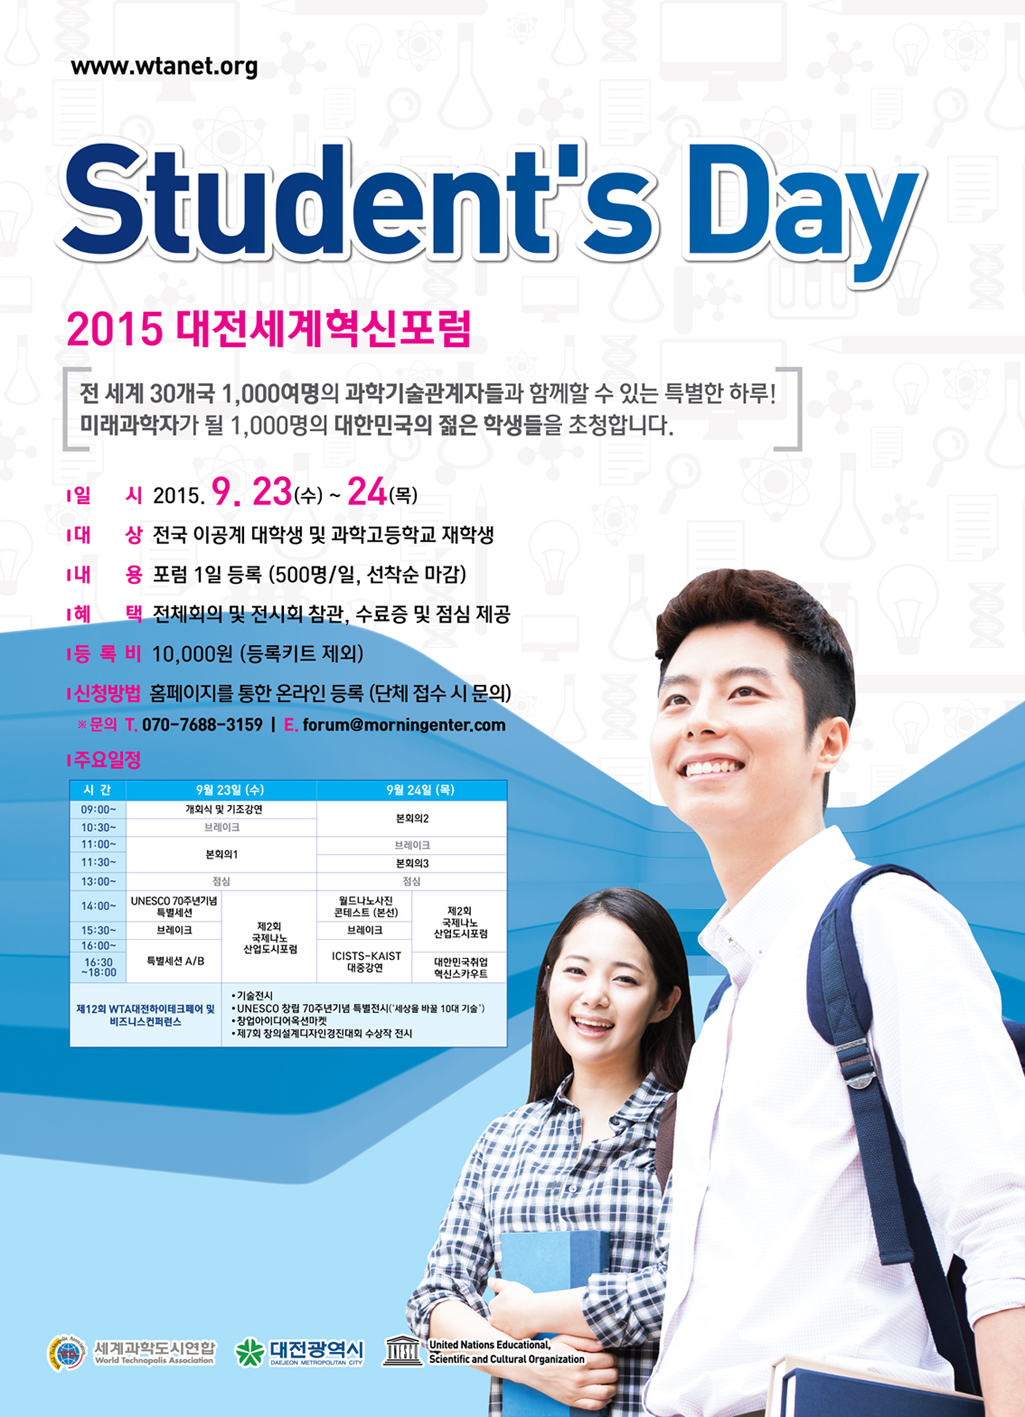 Student's day 포스터_최종_out-01_s.jpg